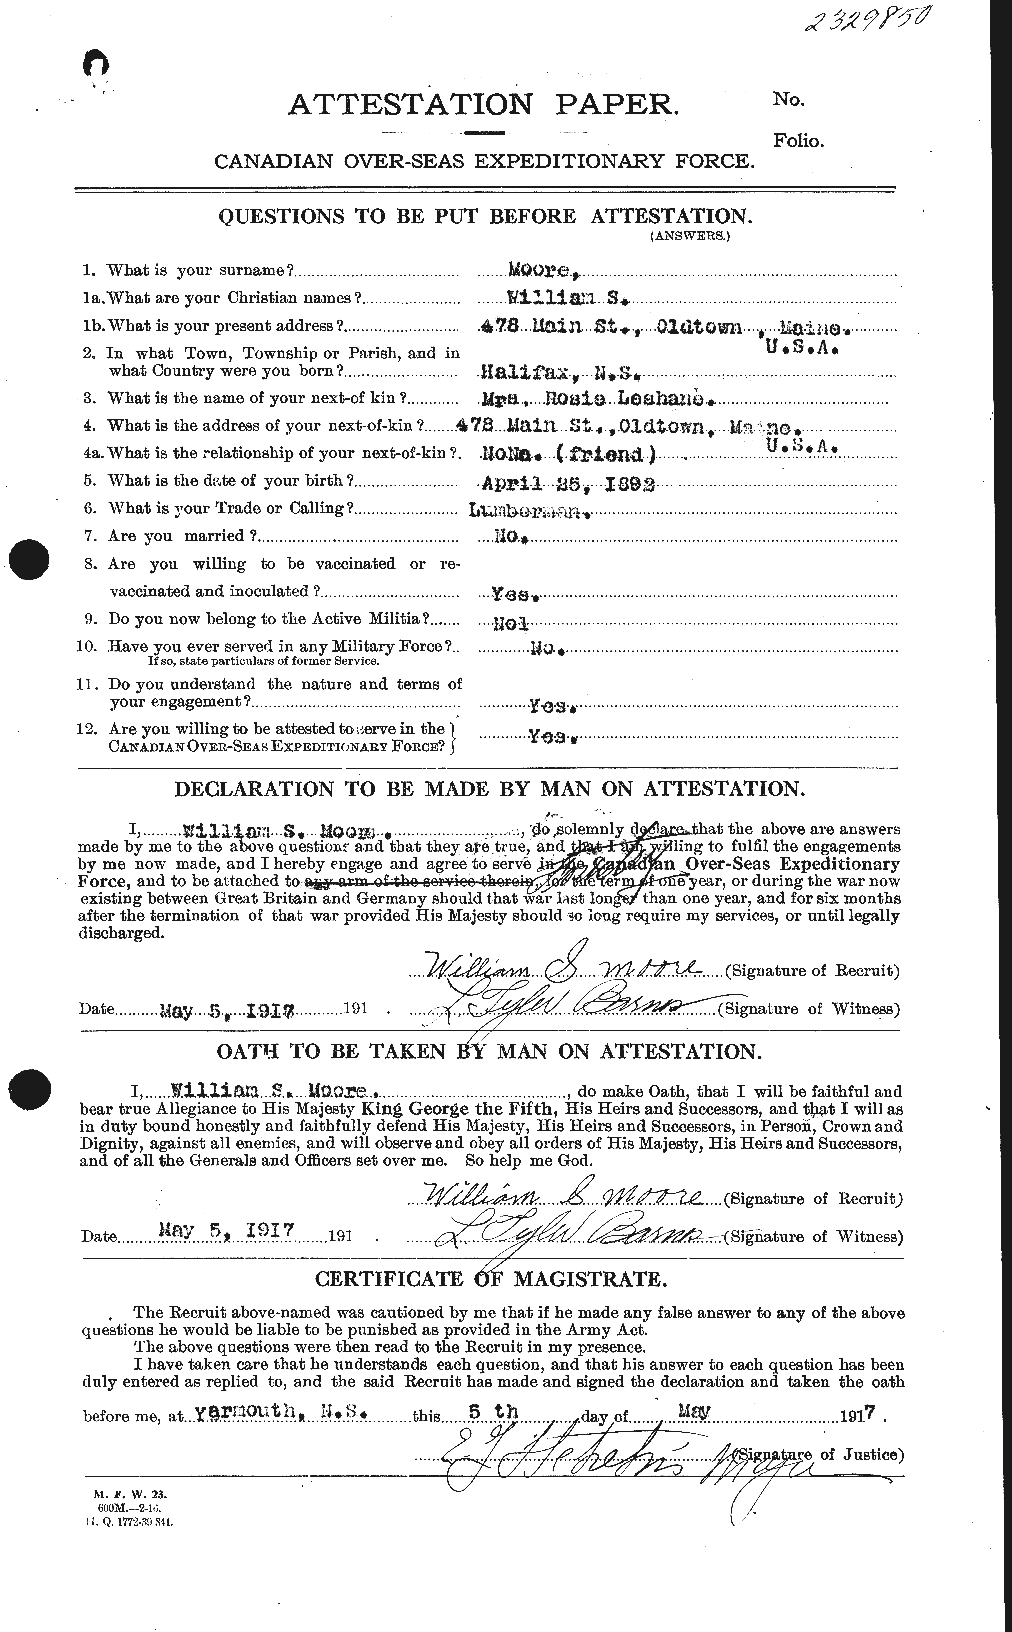 Personnel Records of the First World War - CEF 505869a